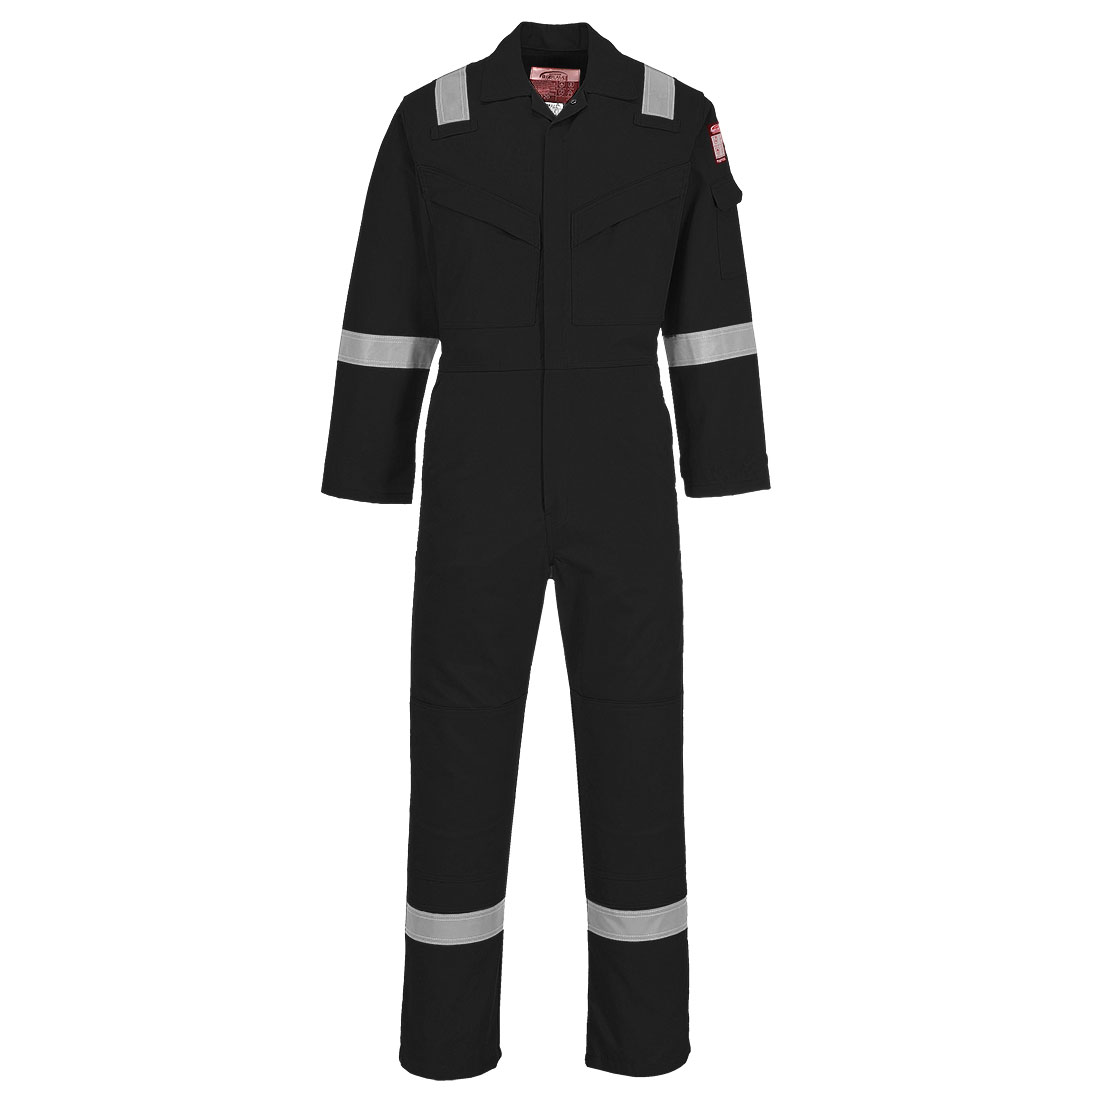 Portwest FR21 Flame Resistant Super Light Weight Anti-Static Coverall 210 g Black L